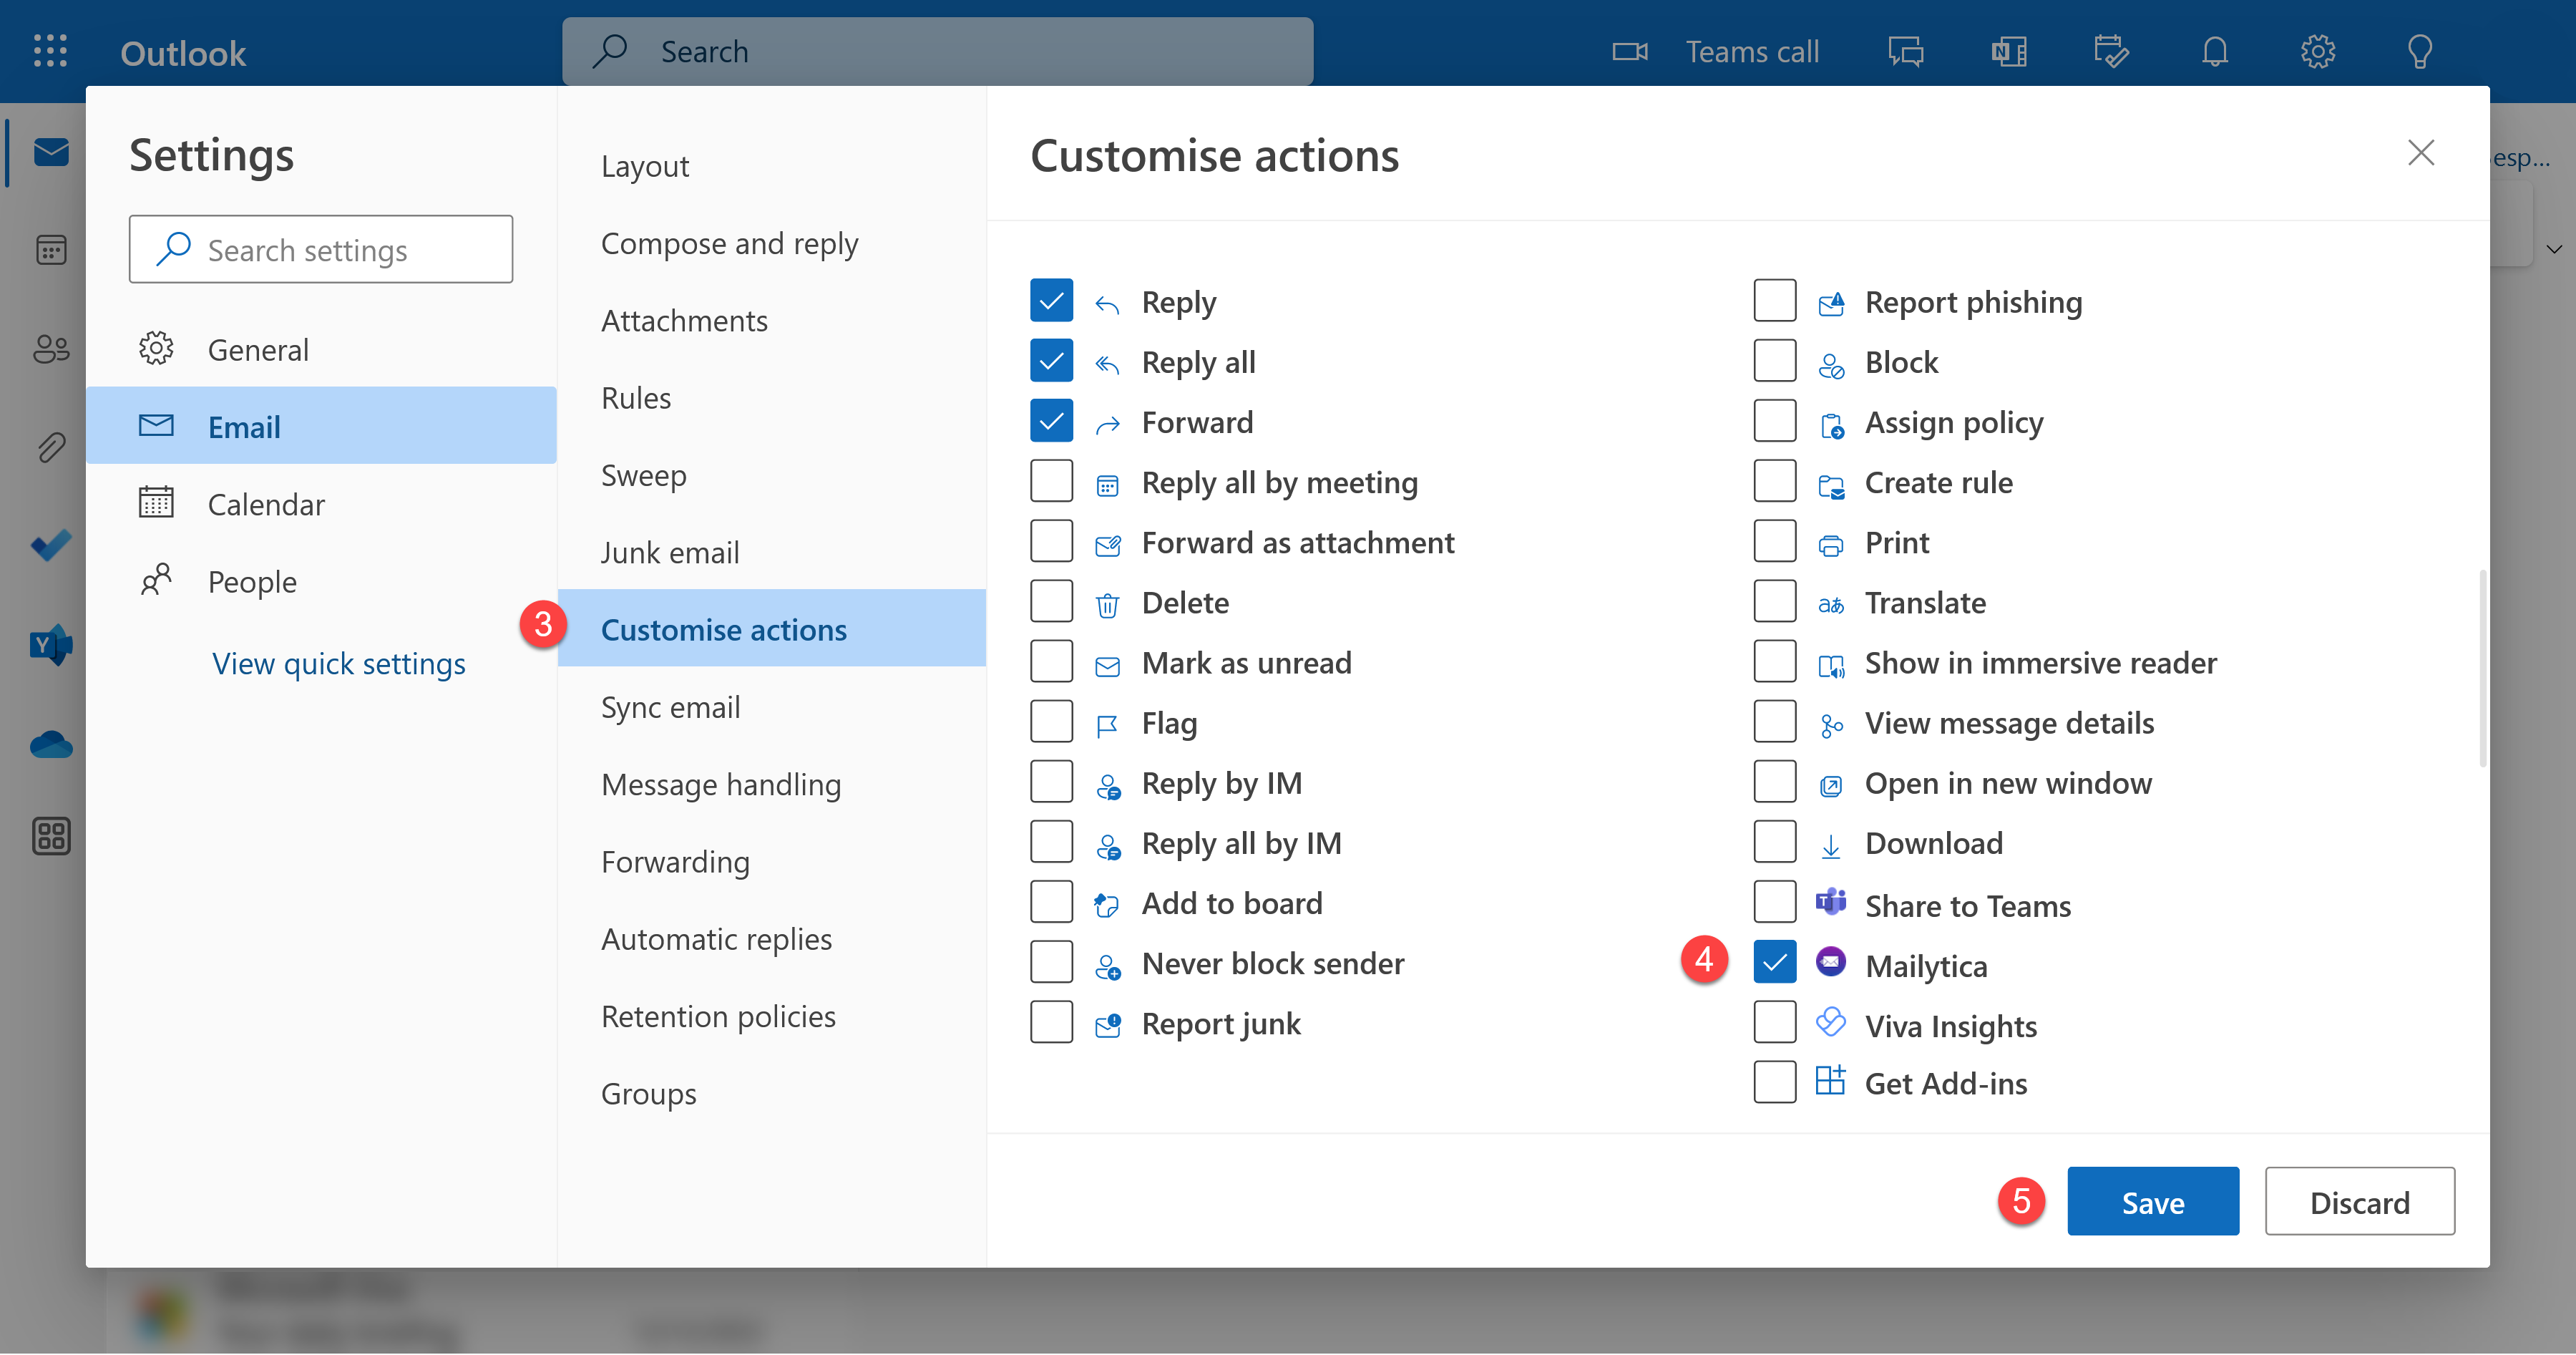 Outlook on the Web actions